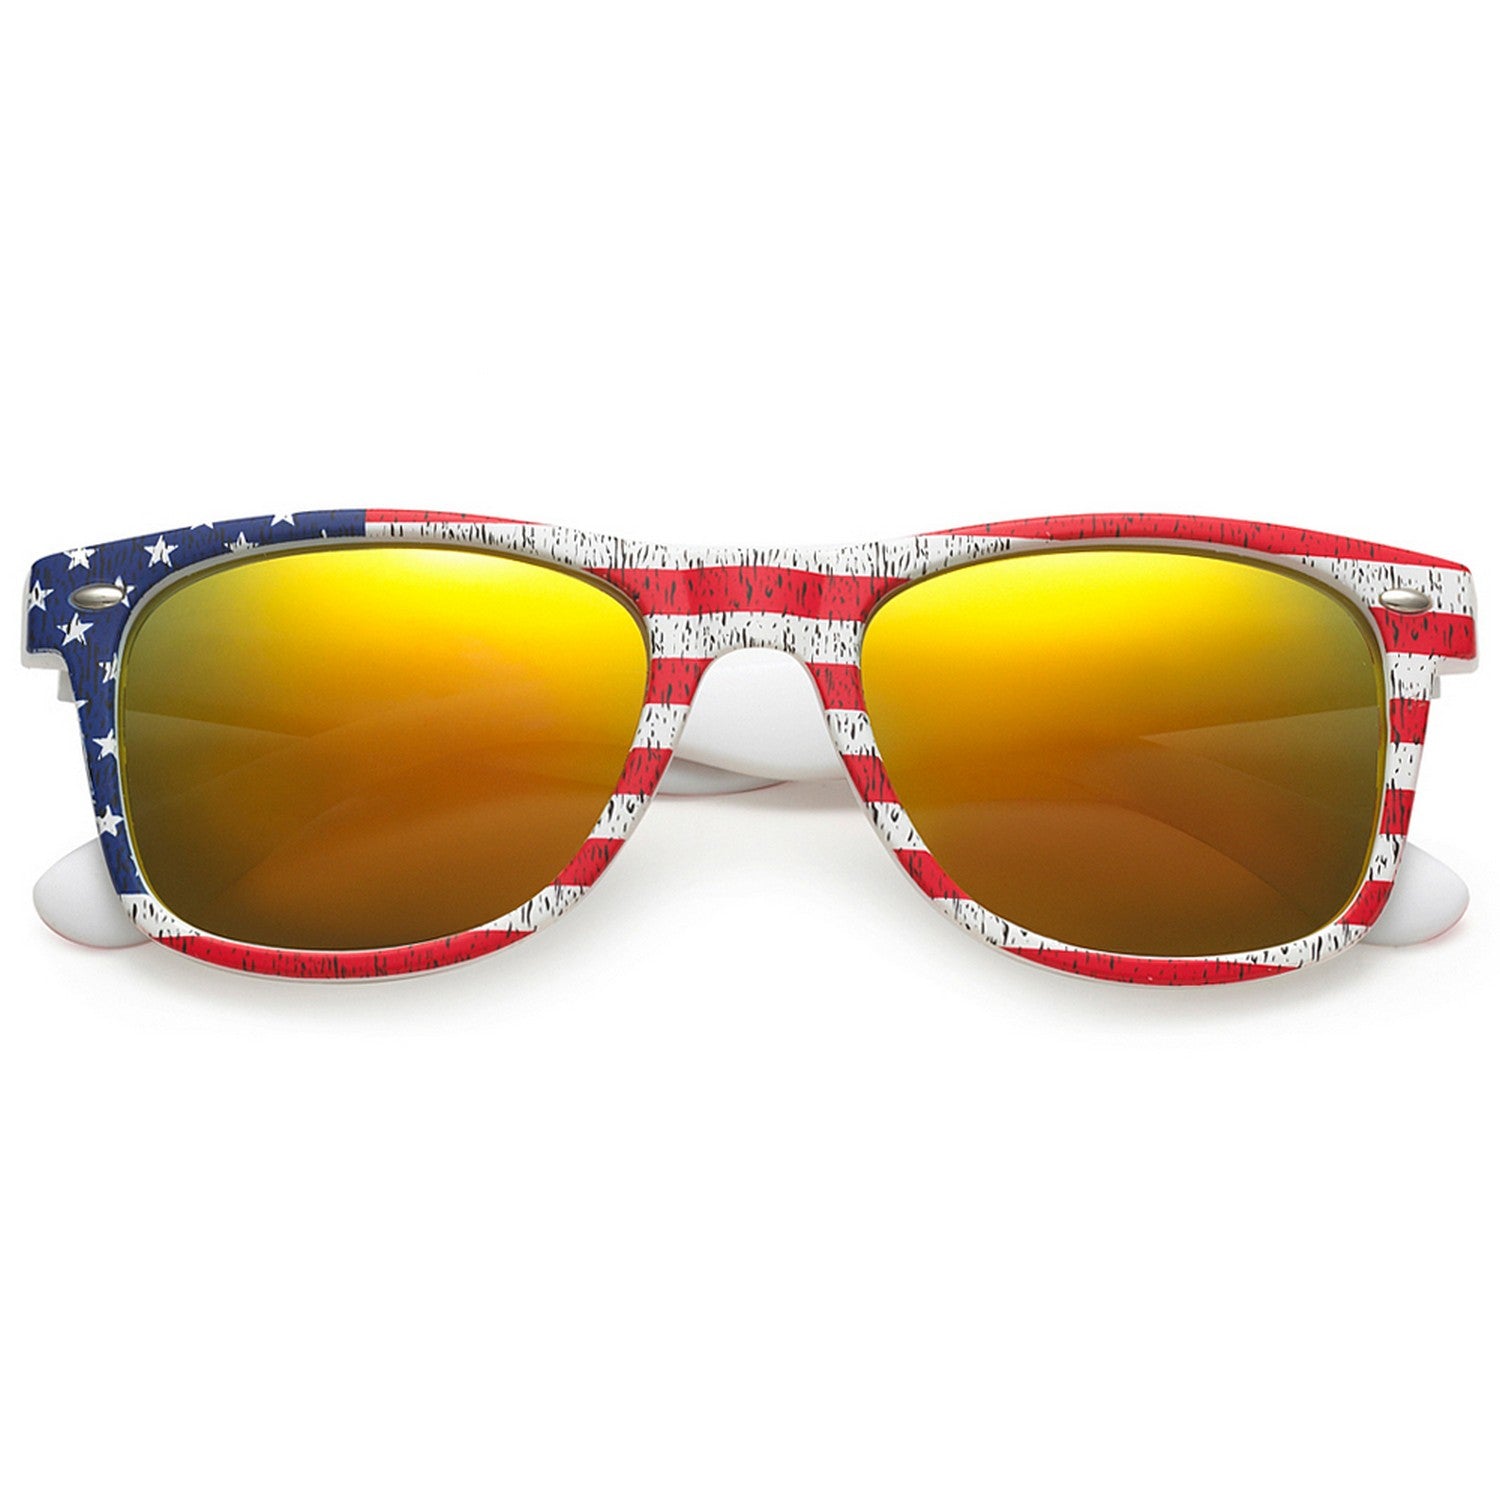 Polarspex Polarized 80's Retro Style Unisex Sunglasses with American Flag Frames and Lava Red Lenses